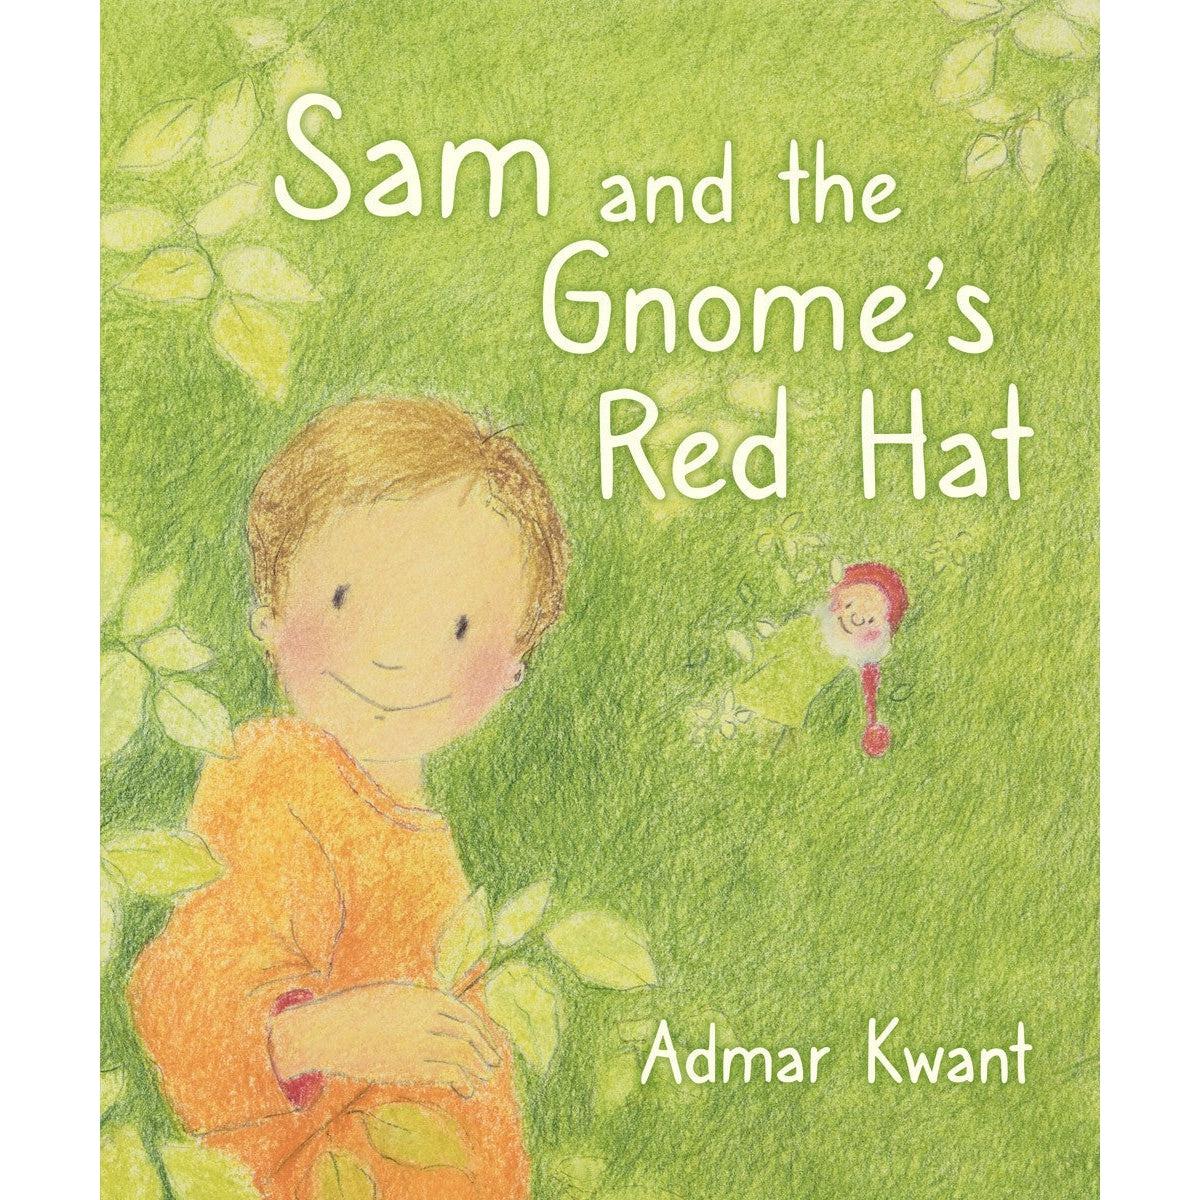 Sam And The Gnome's Red Hat - Admar Kwant